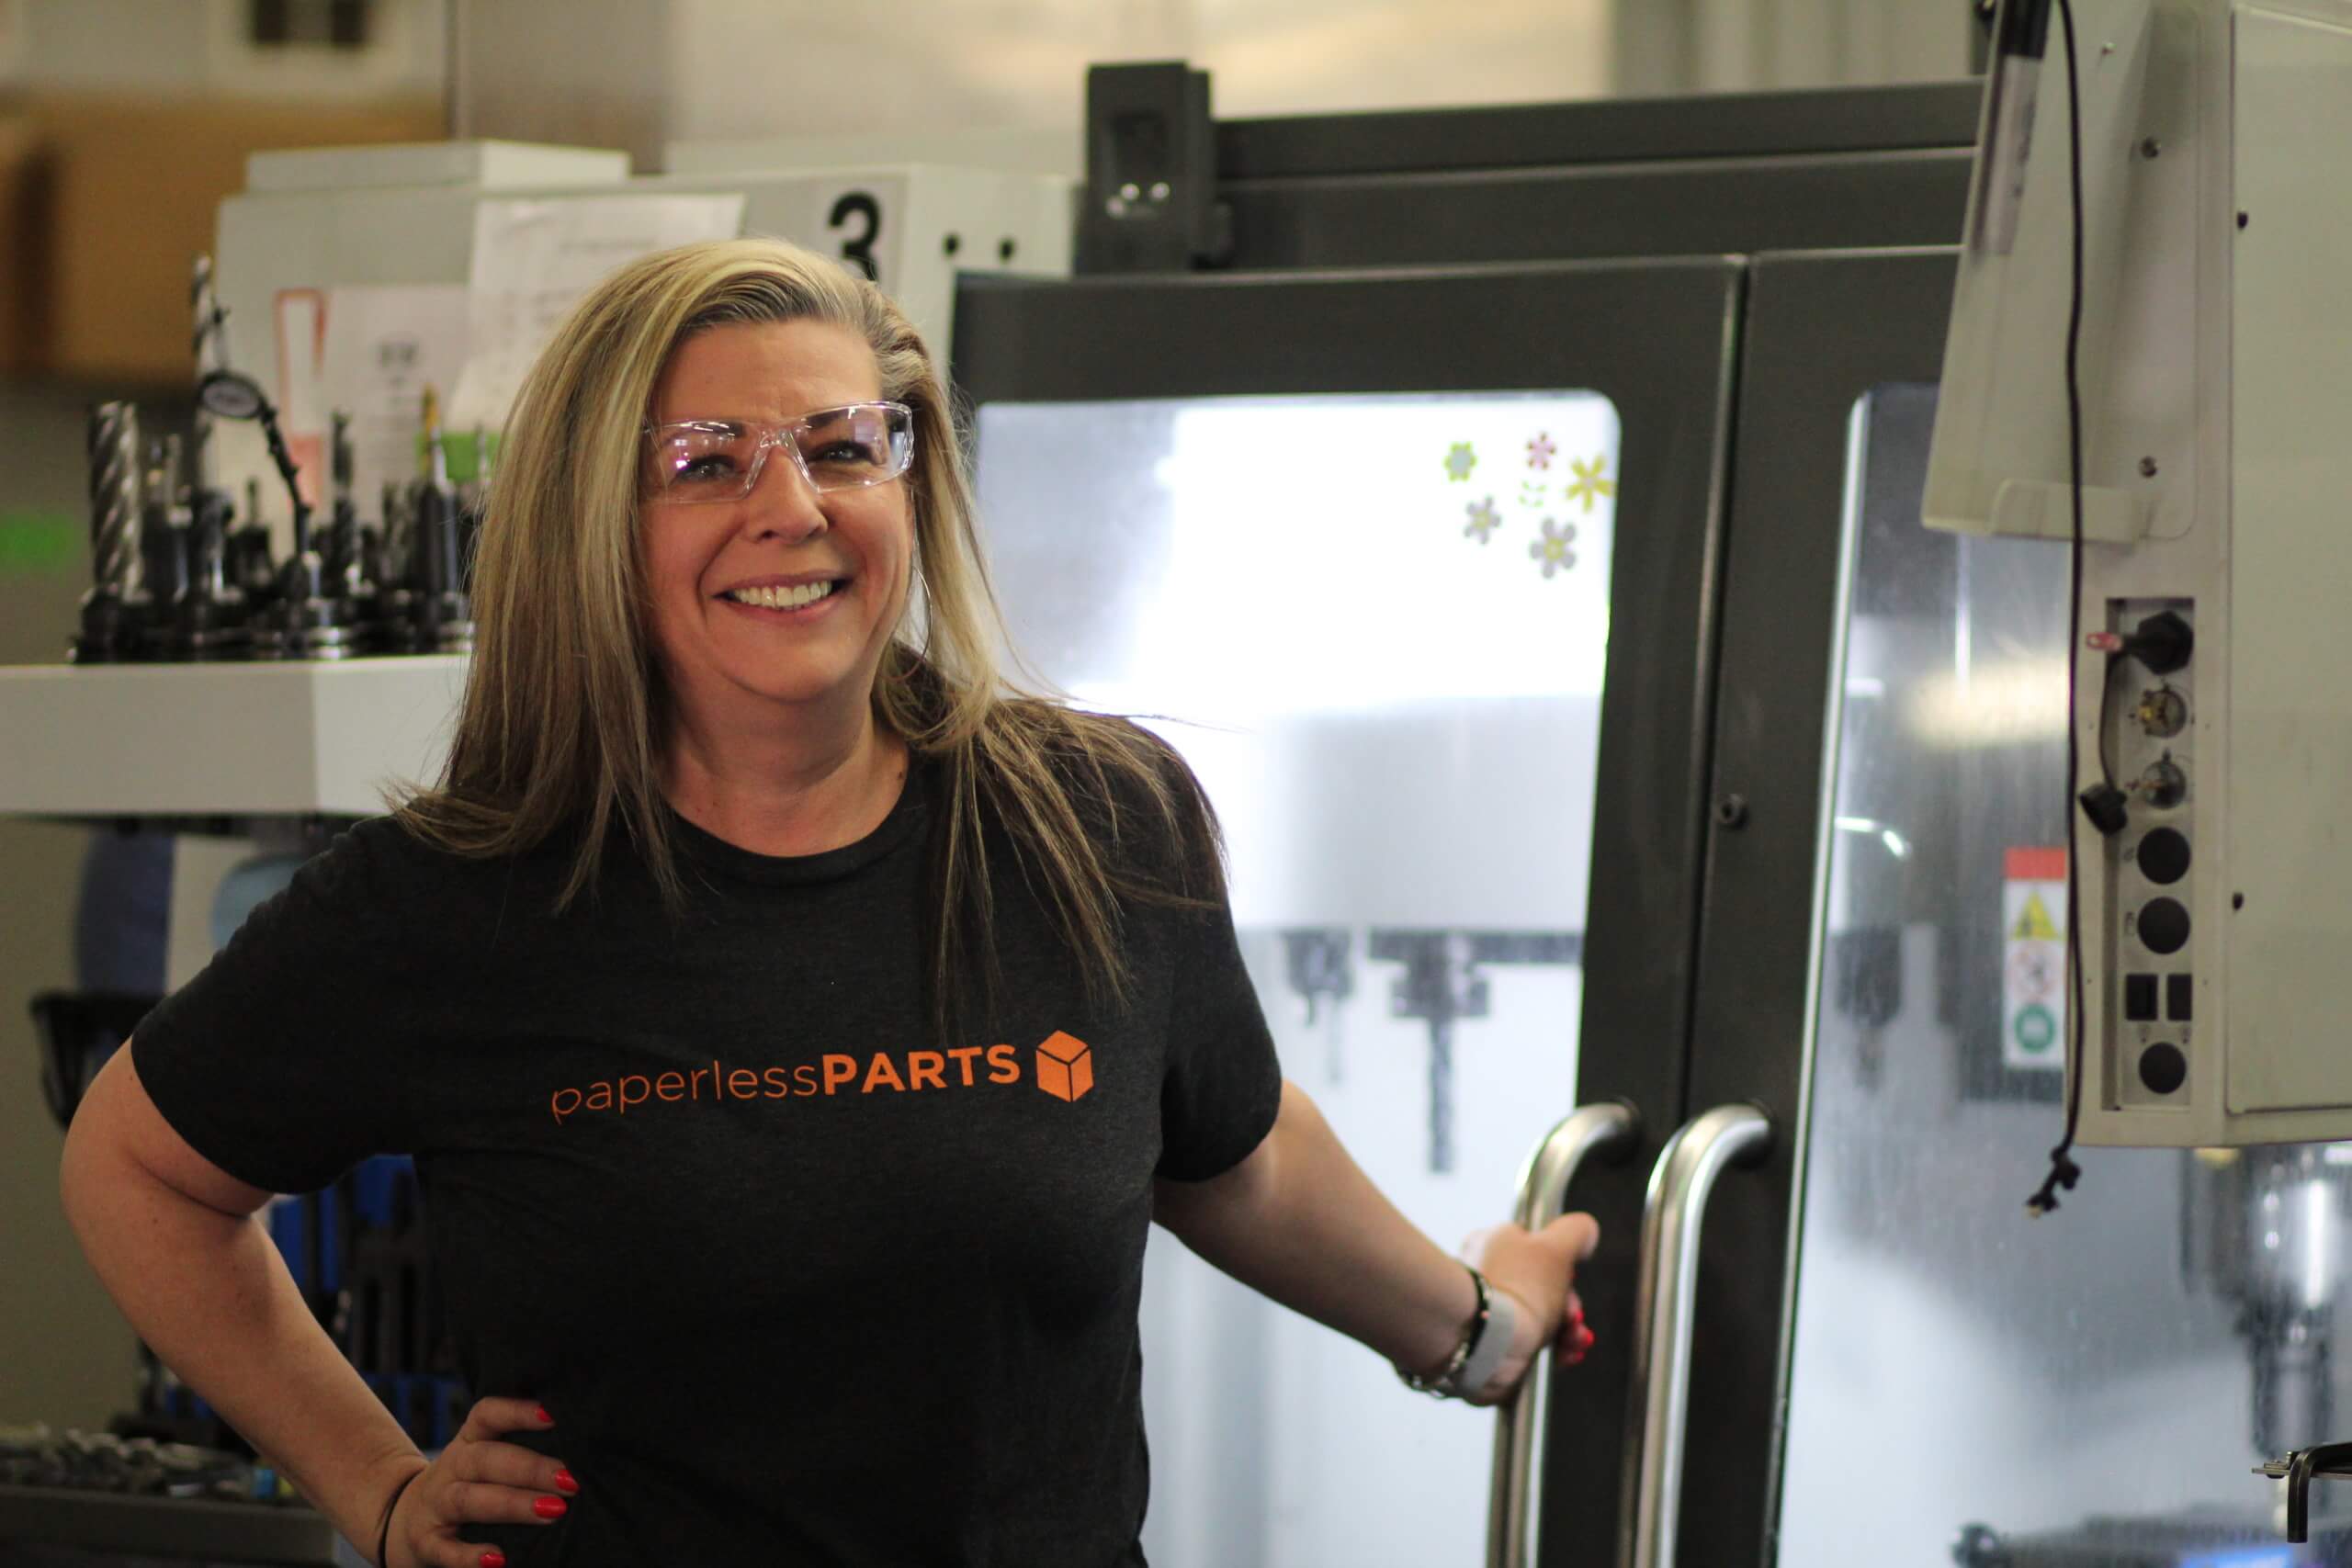 BTM Industries Improves Quoting Speed and Consistency with Paperless Parts